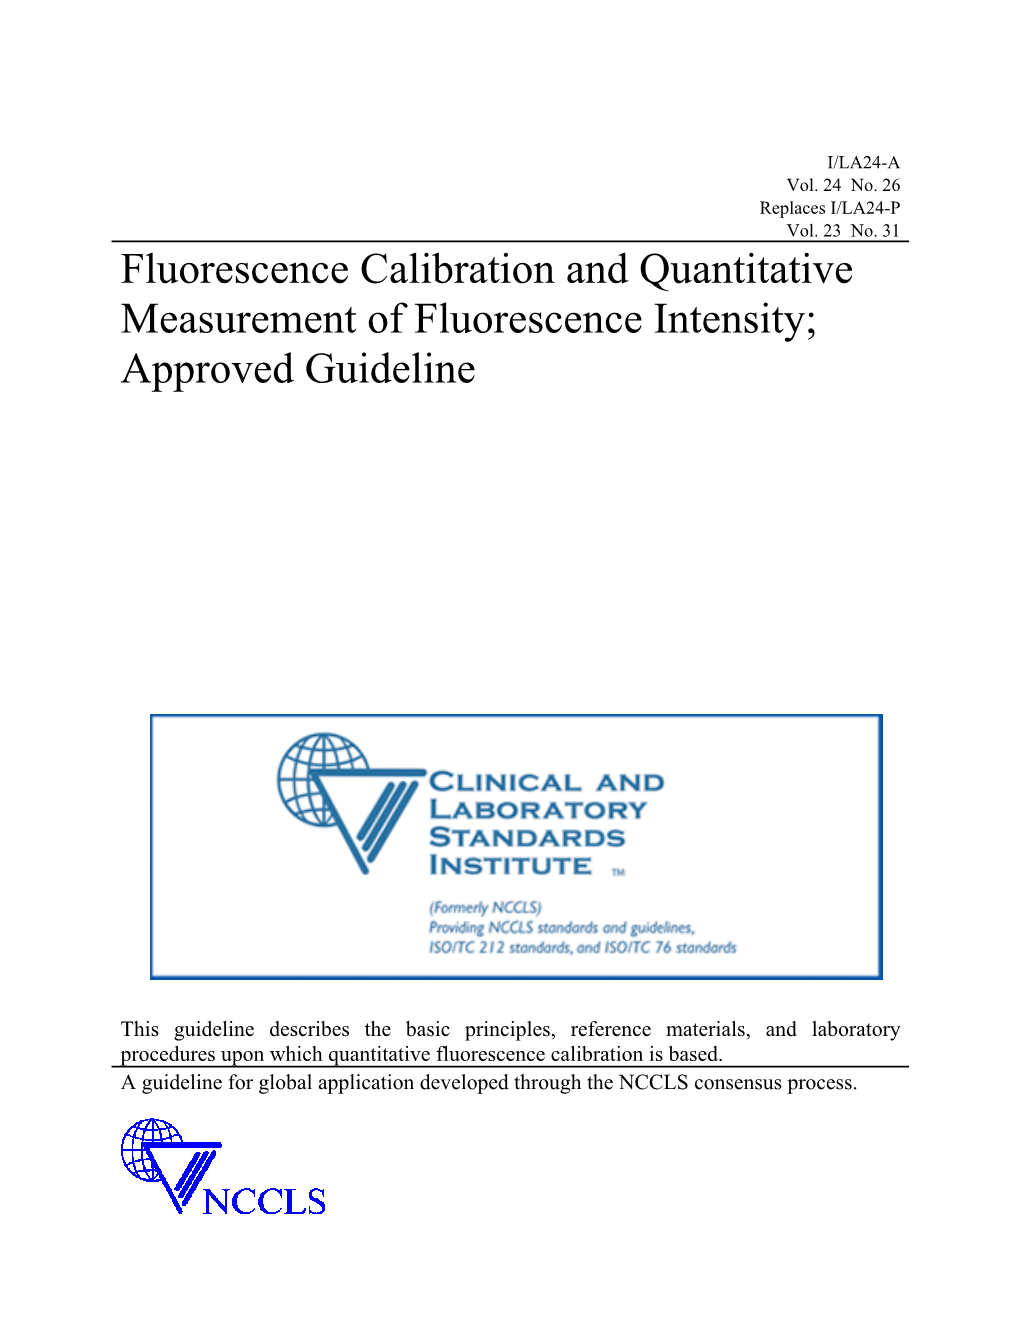 ILA24-A Fluorescence Calibration and Quantitative Measurement of Fluorescence Intensity; Approved Guideline